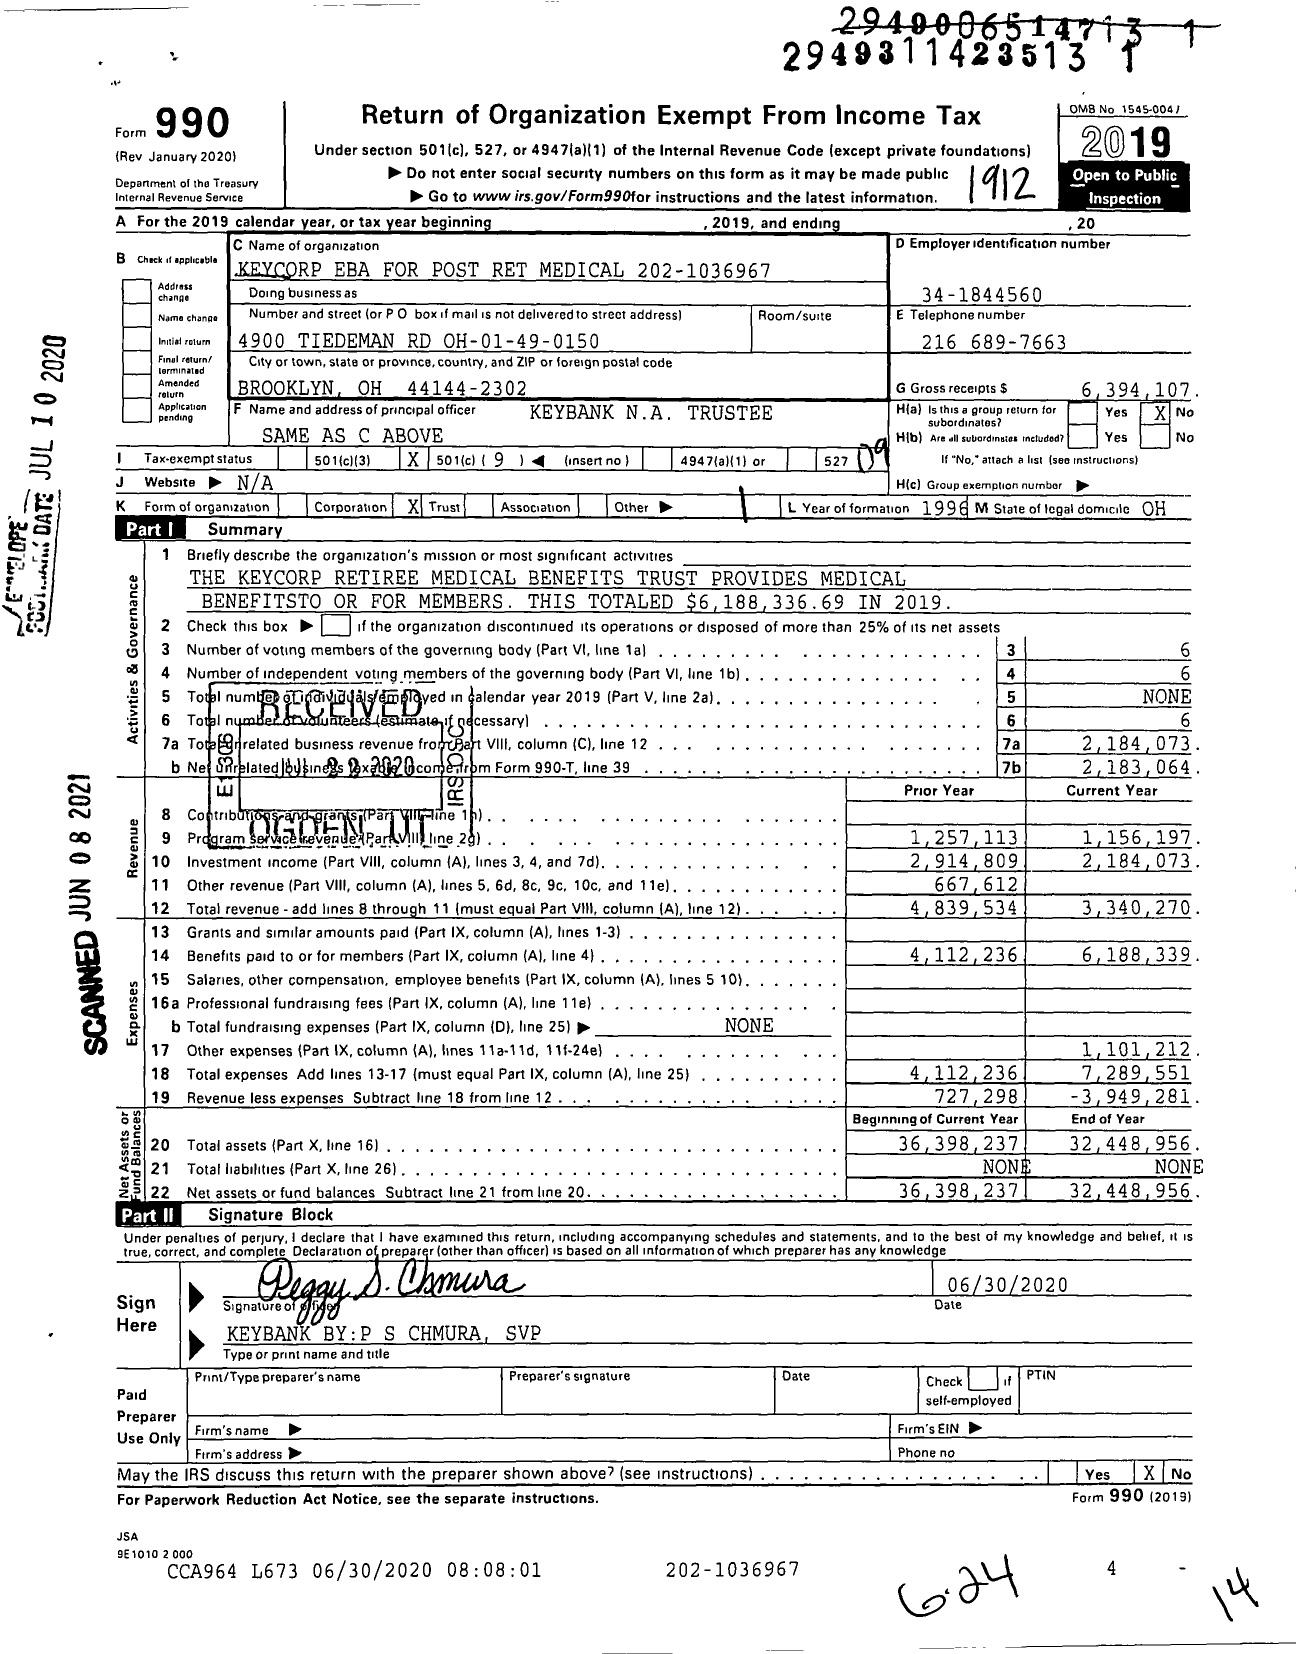 Image of first page of 2019 Form 990O for Keycorp Eba for Post Ret Medical